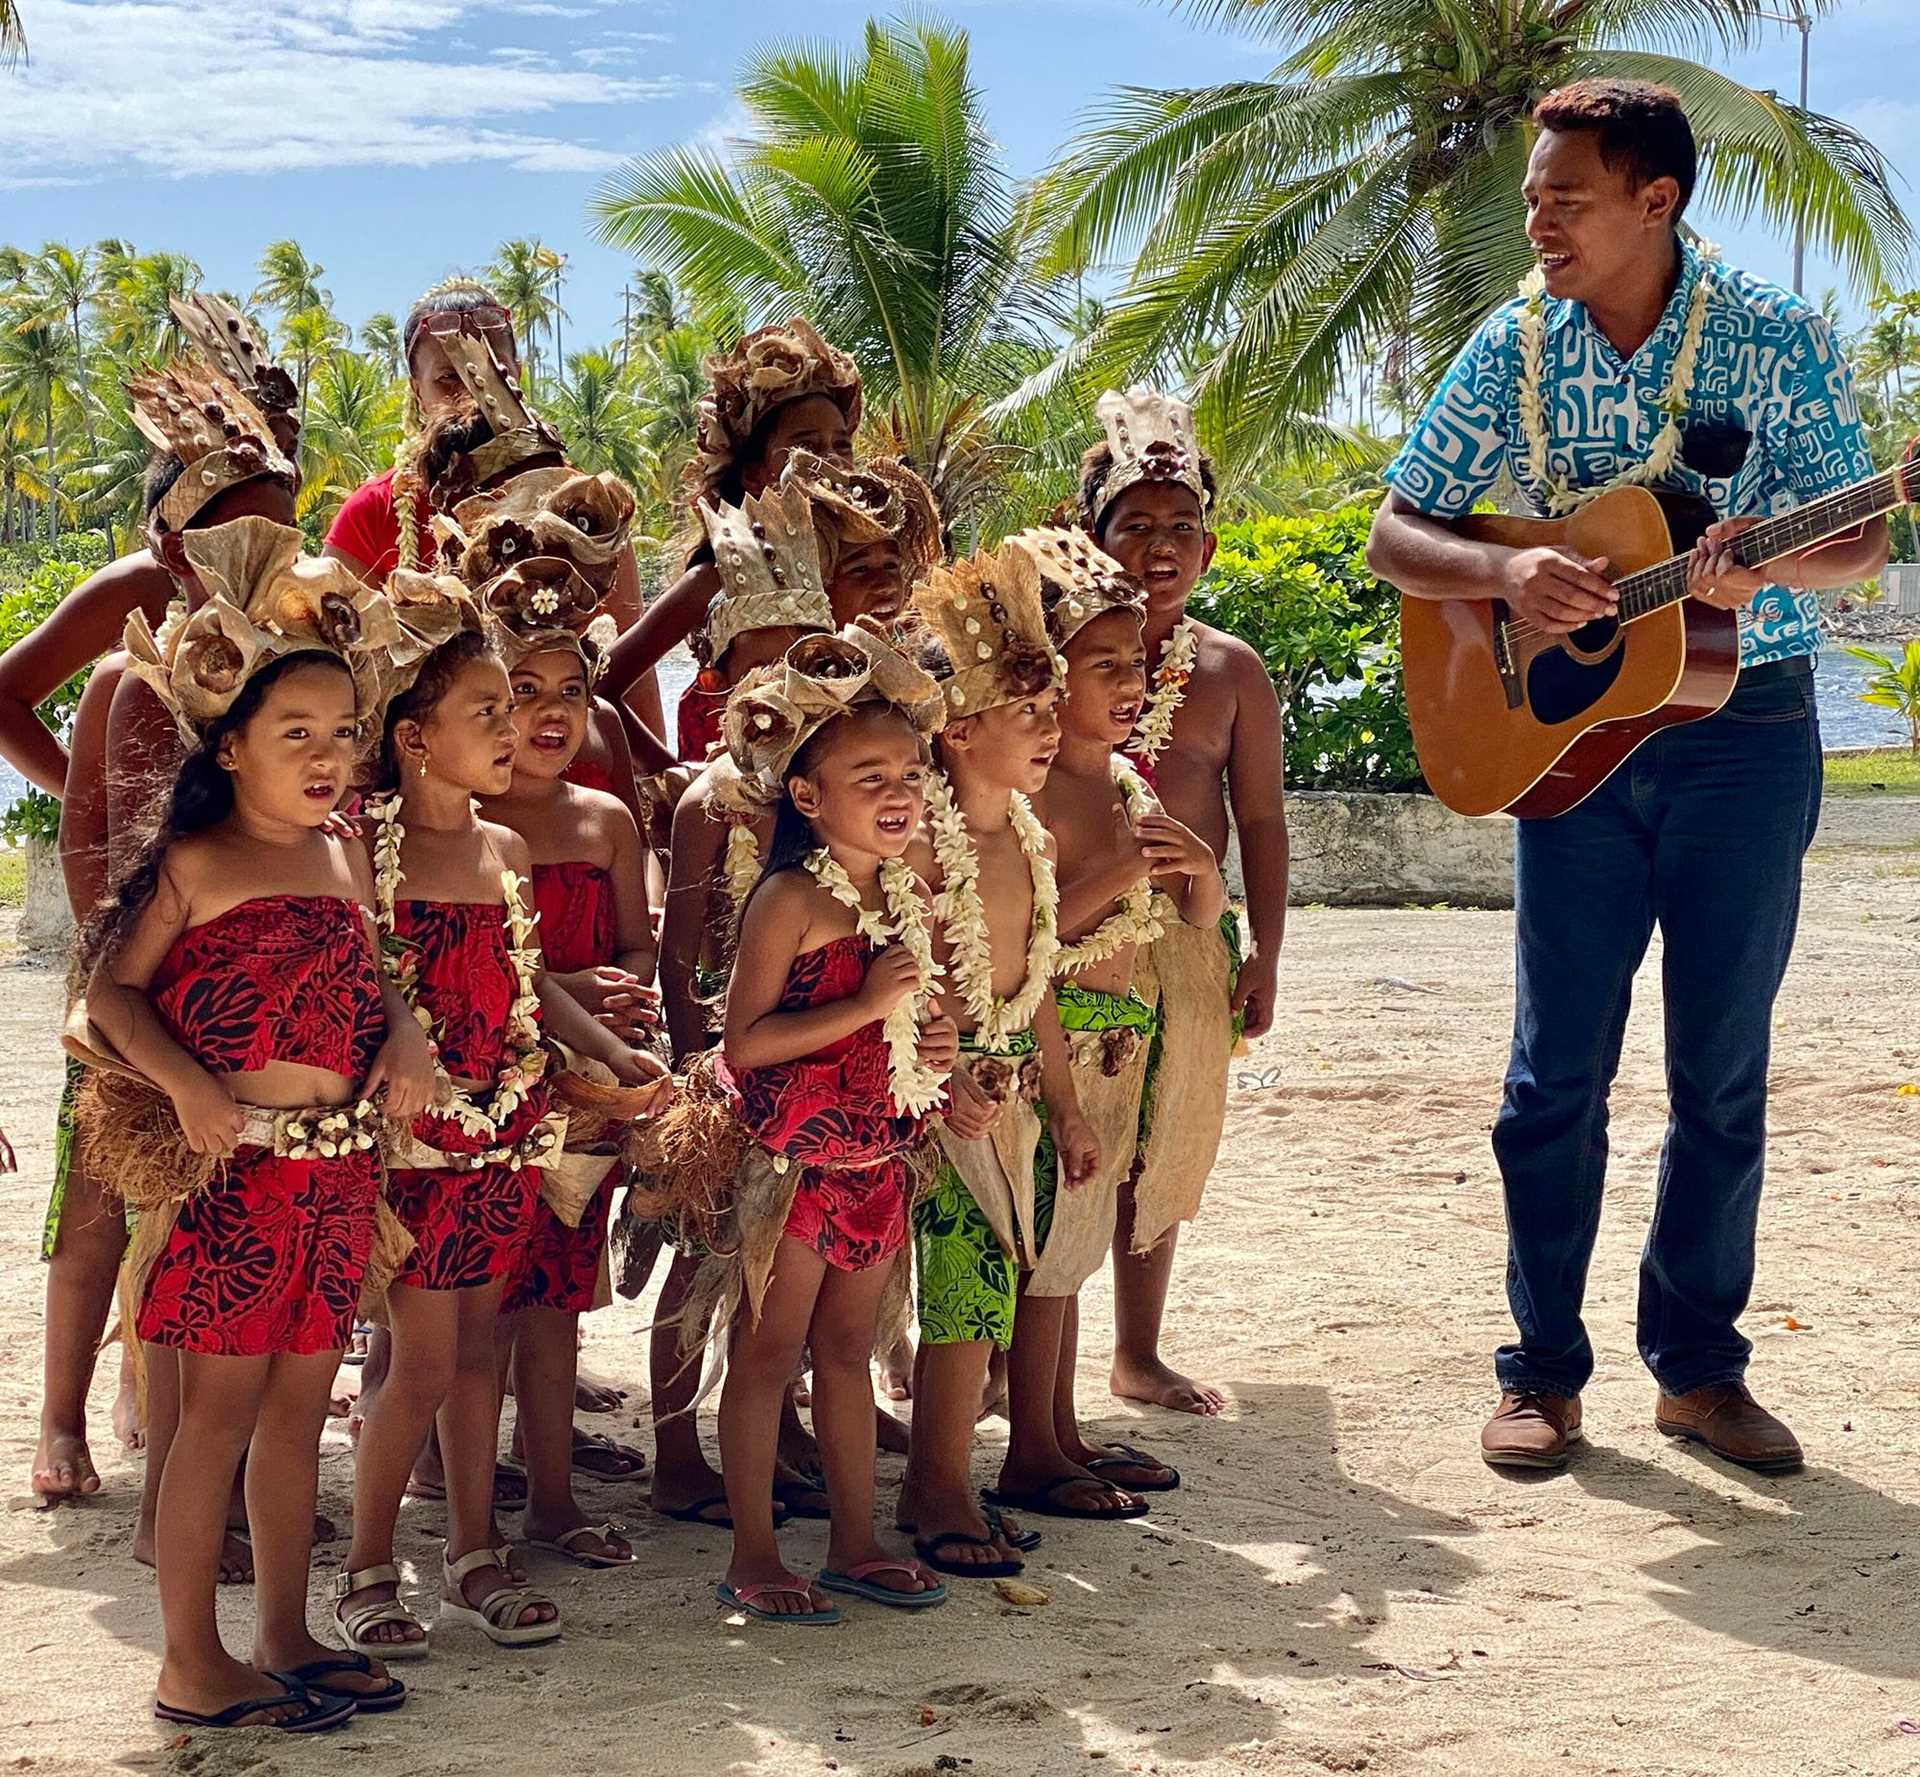 a man playing a guitar while children sing